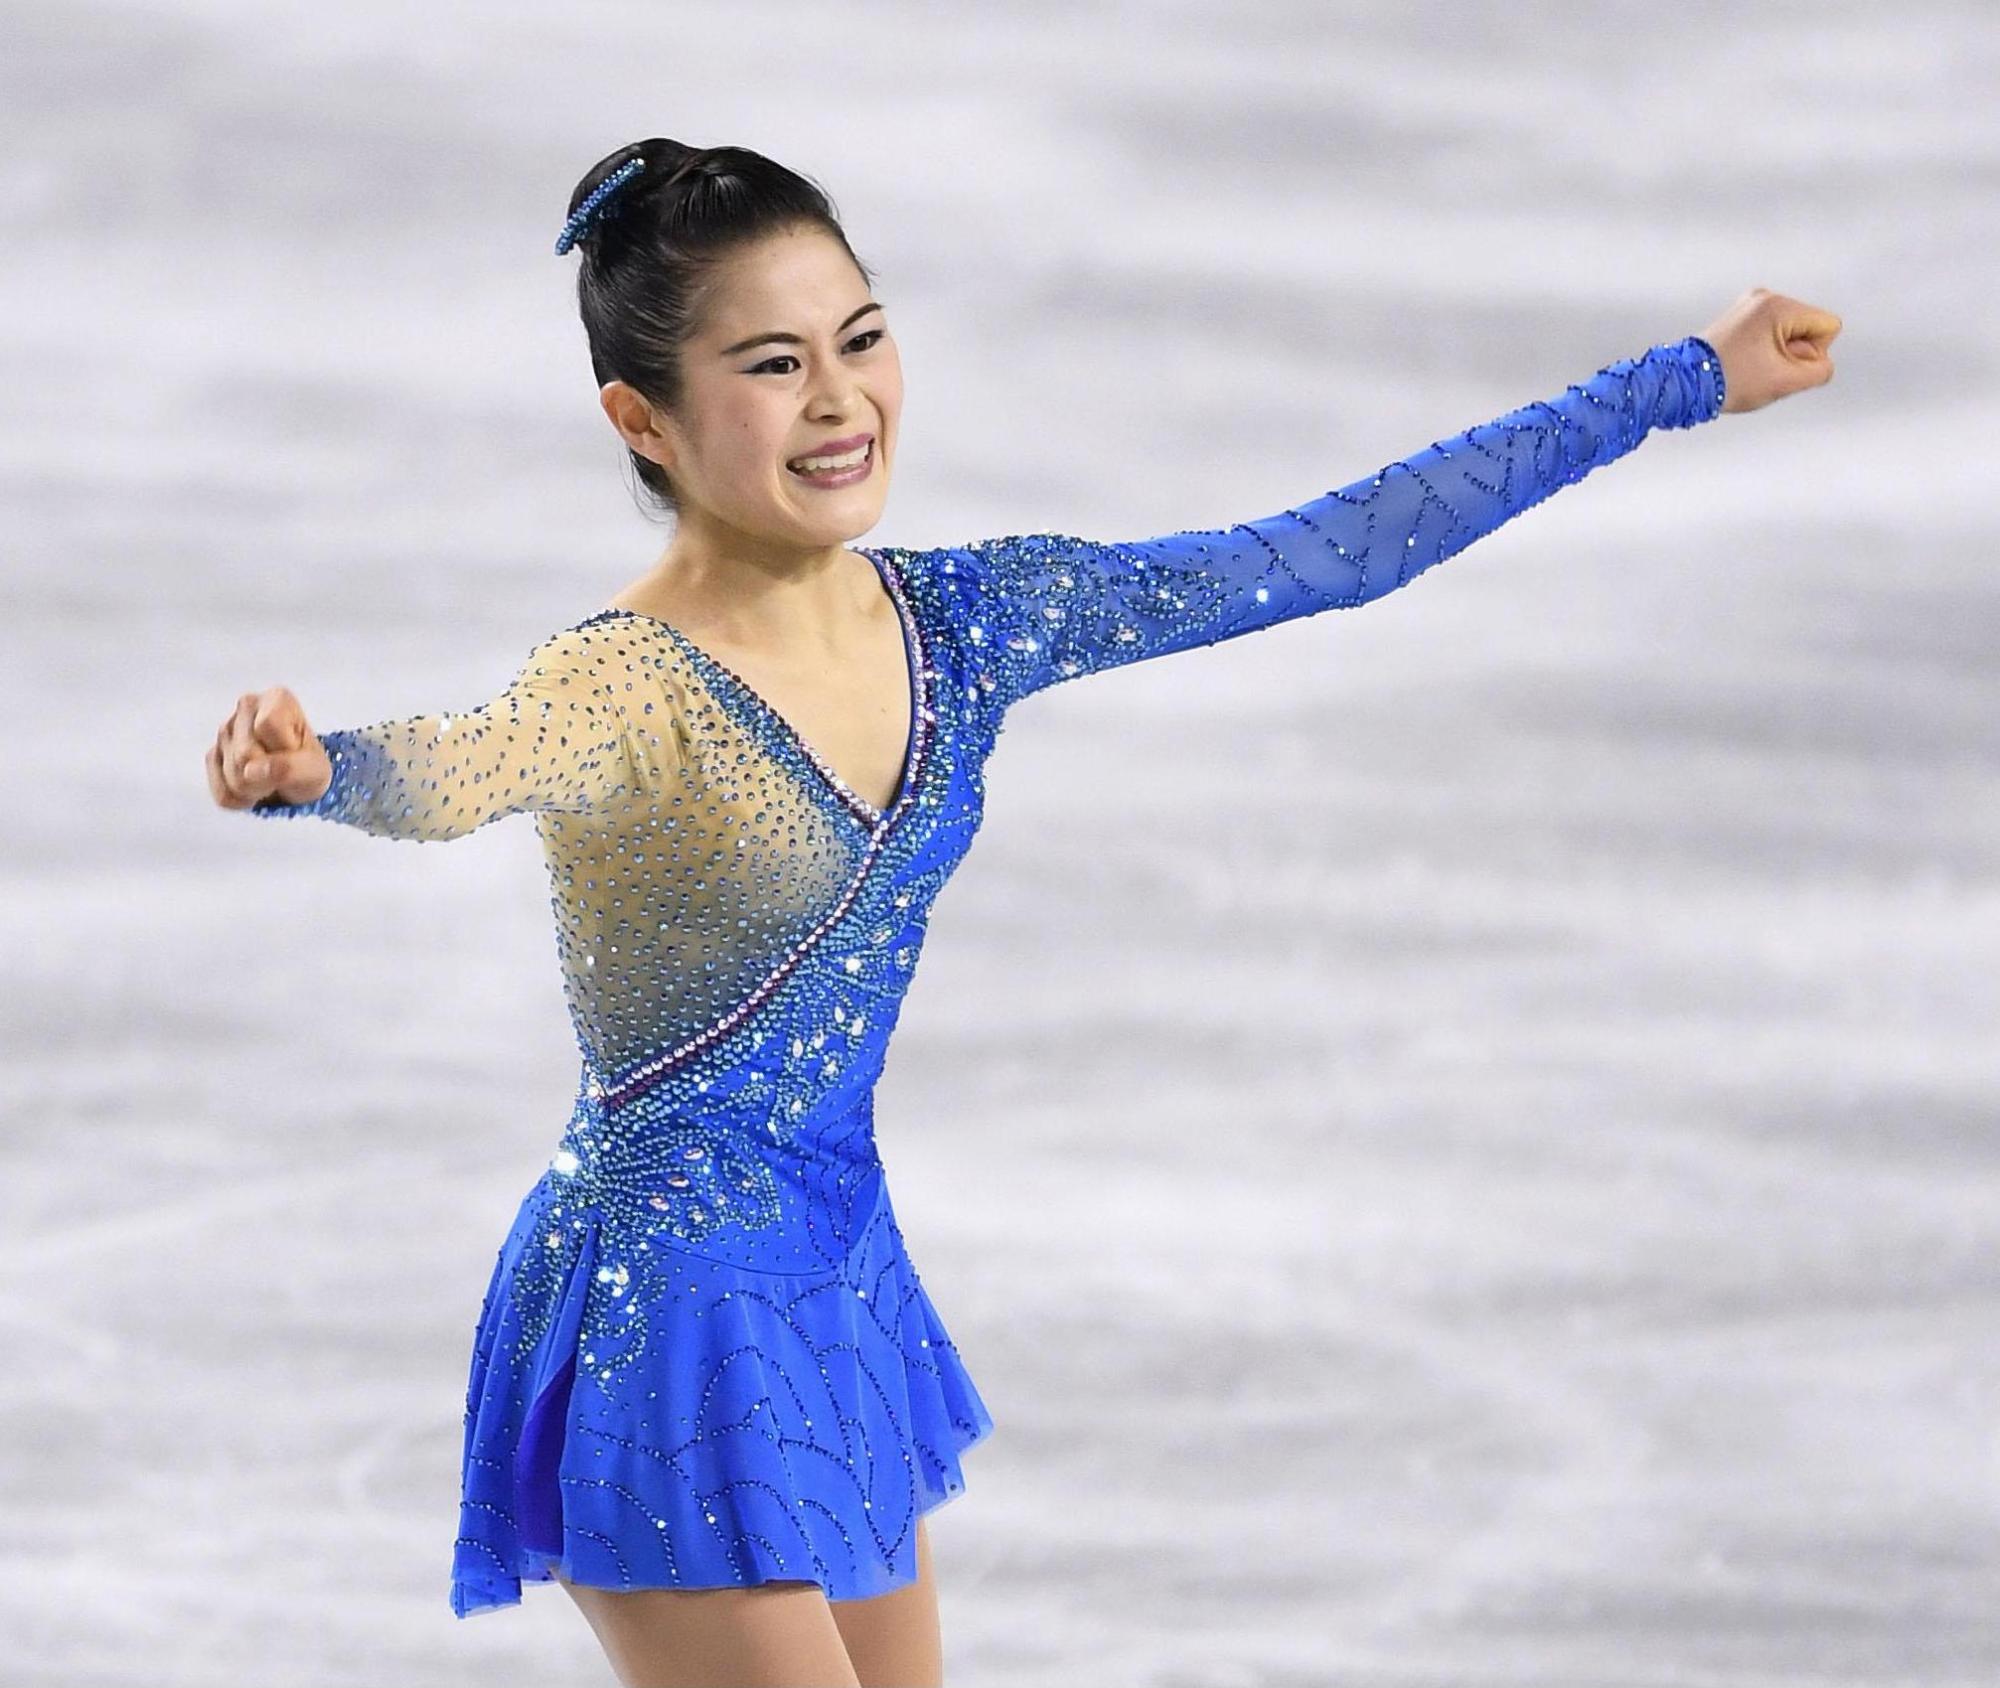 Satoko Miyahara celebrates after her enchanting performance to 'Madame Butterfly' in the women's free skate at the All-Japan Championships on Saturday night at Musashino Forest Sports Centre. Miyahara won her fourth straight national title. | KYODO